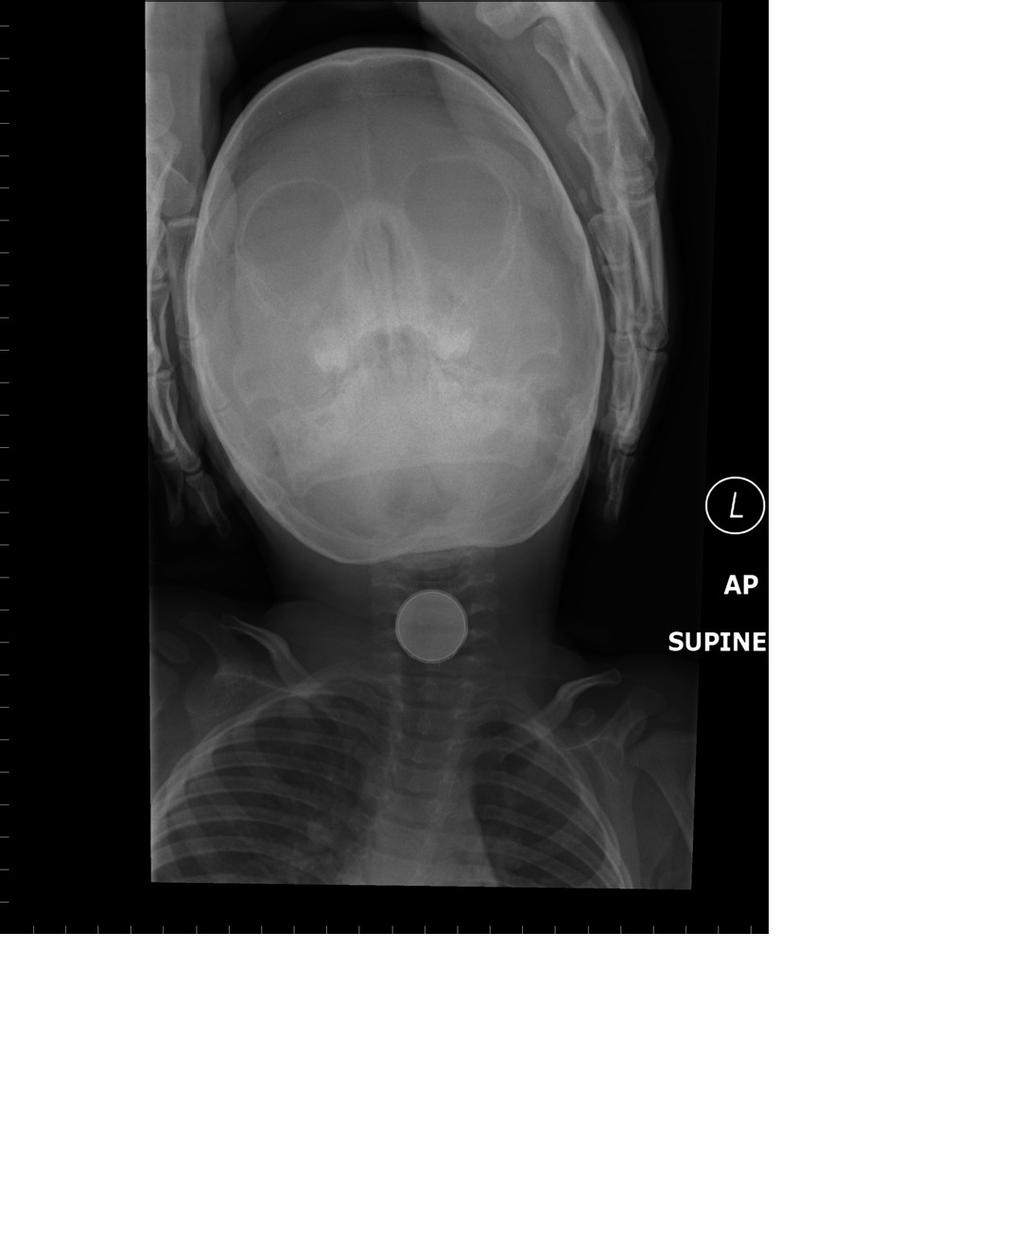 Figure 1. Lateral and Frontal View of Ingestion of a disk battery. Note the two-step pattern on the lateral radiograph and the double circle pattern in coronal plane on the frontal radiograph.